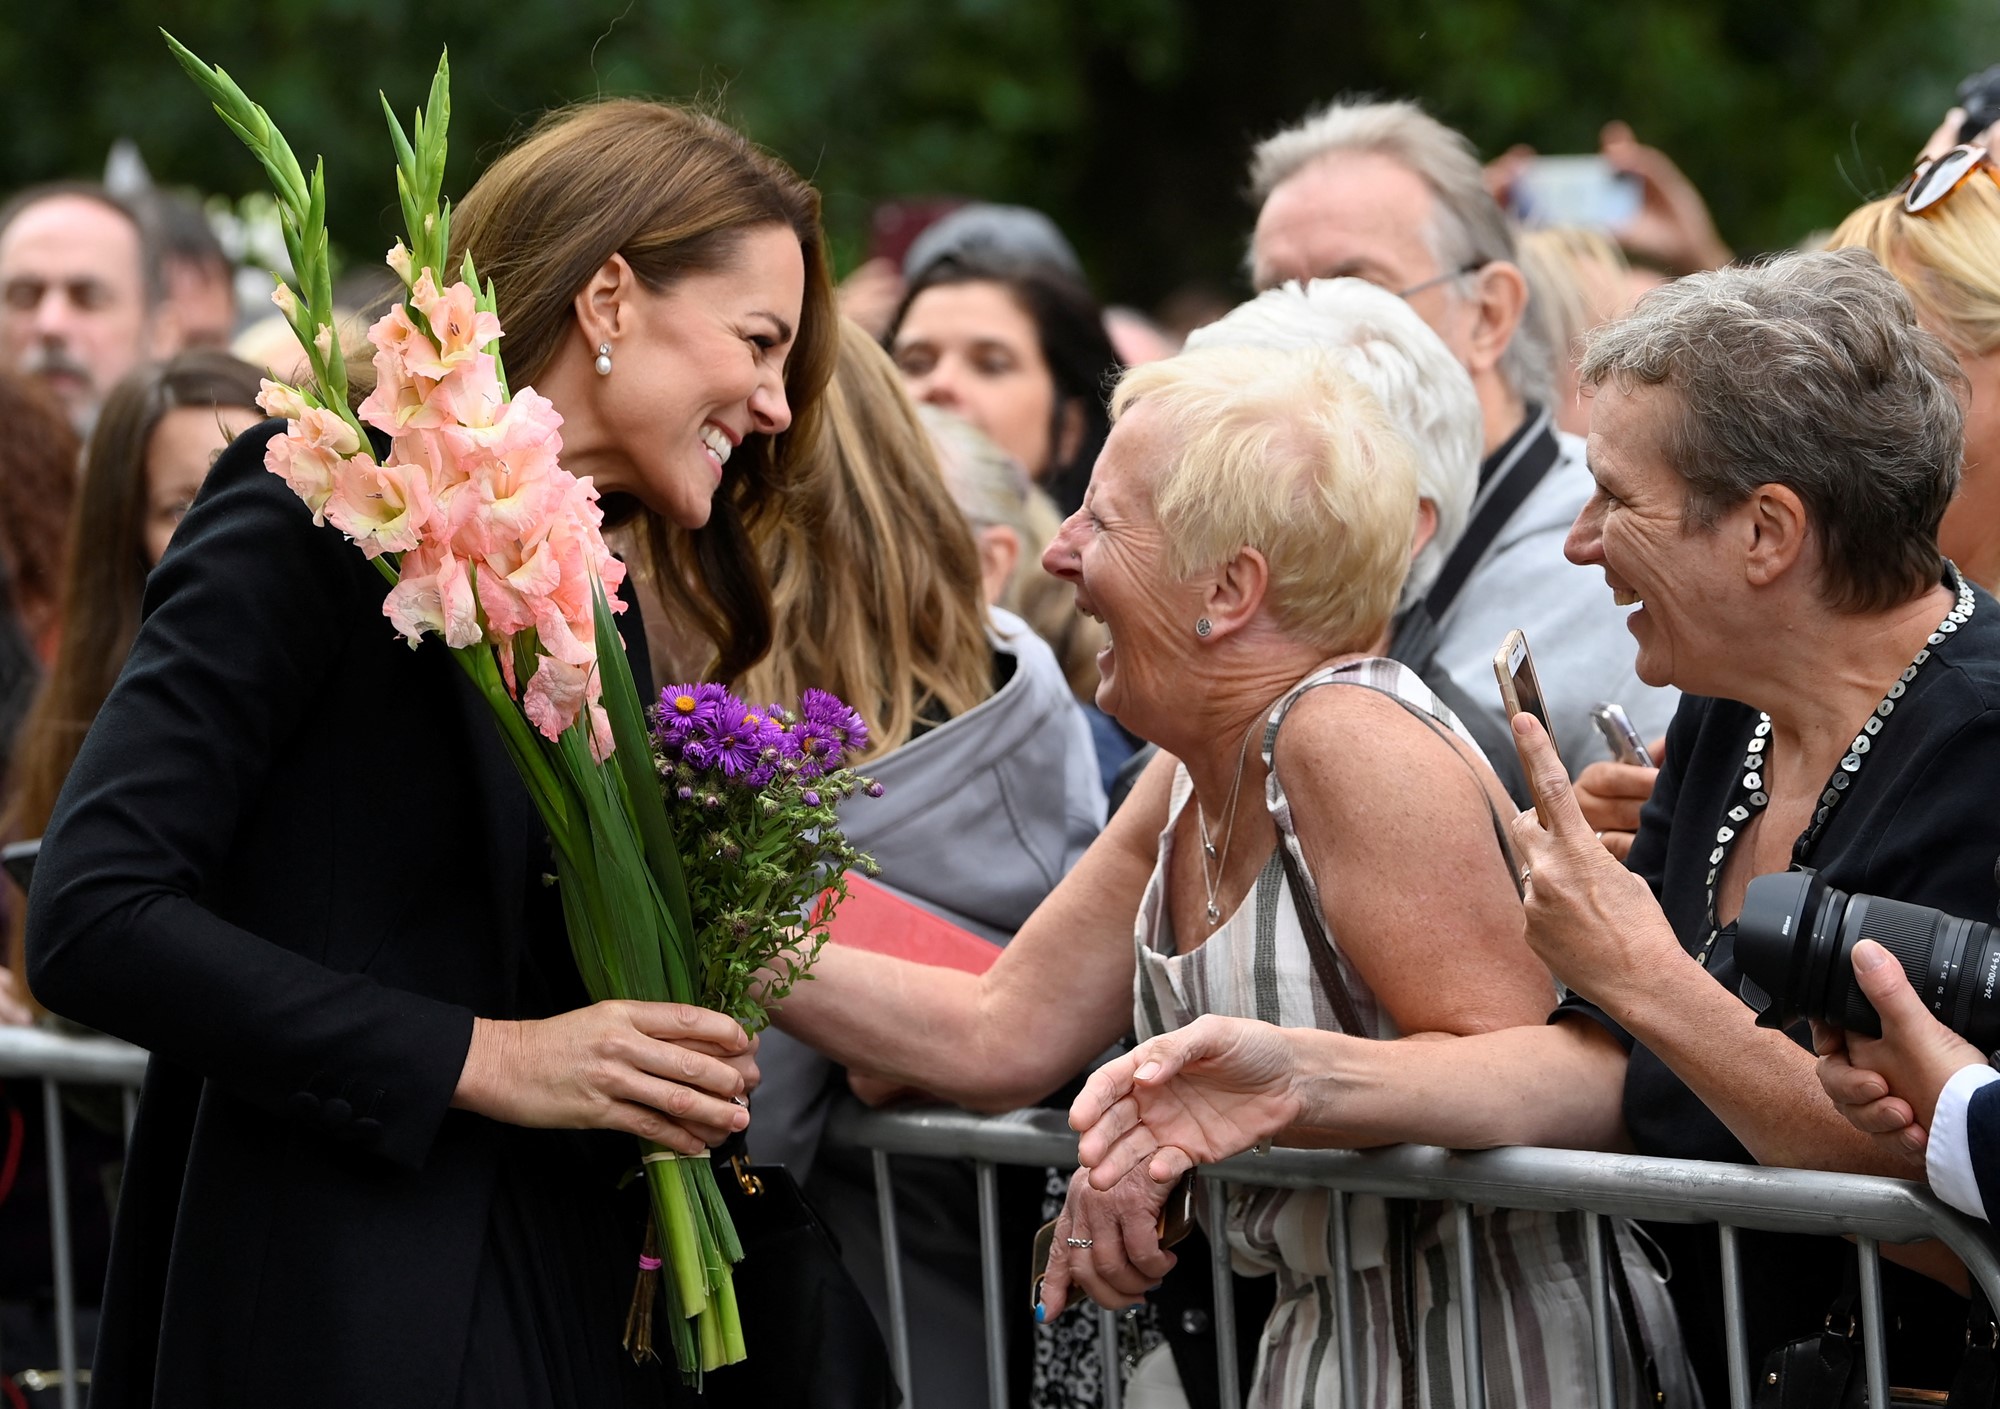 Kate smiles widely at a woman who hands her pink flowers.